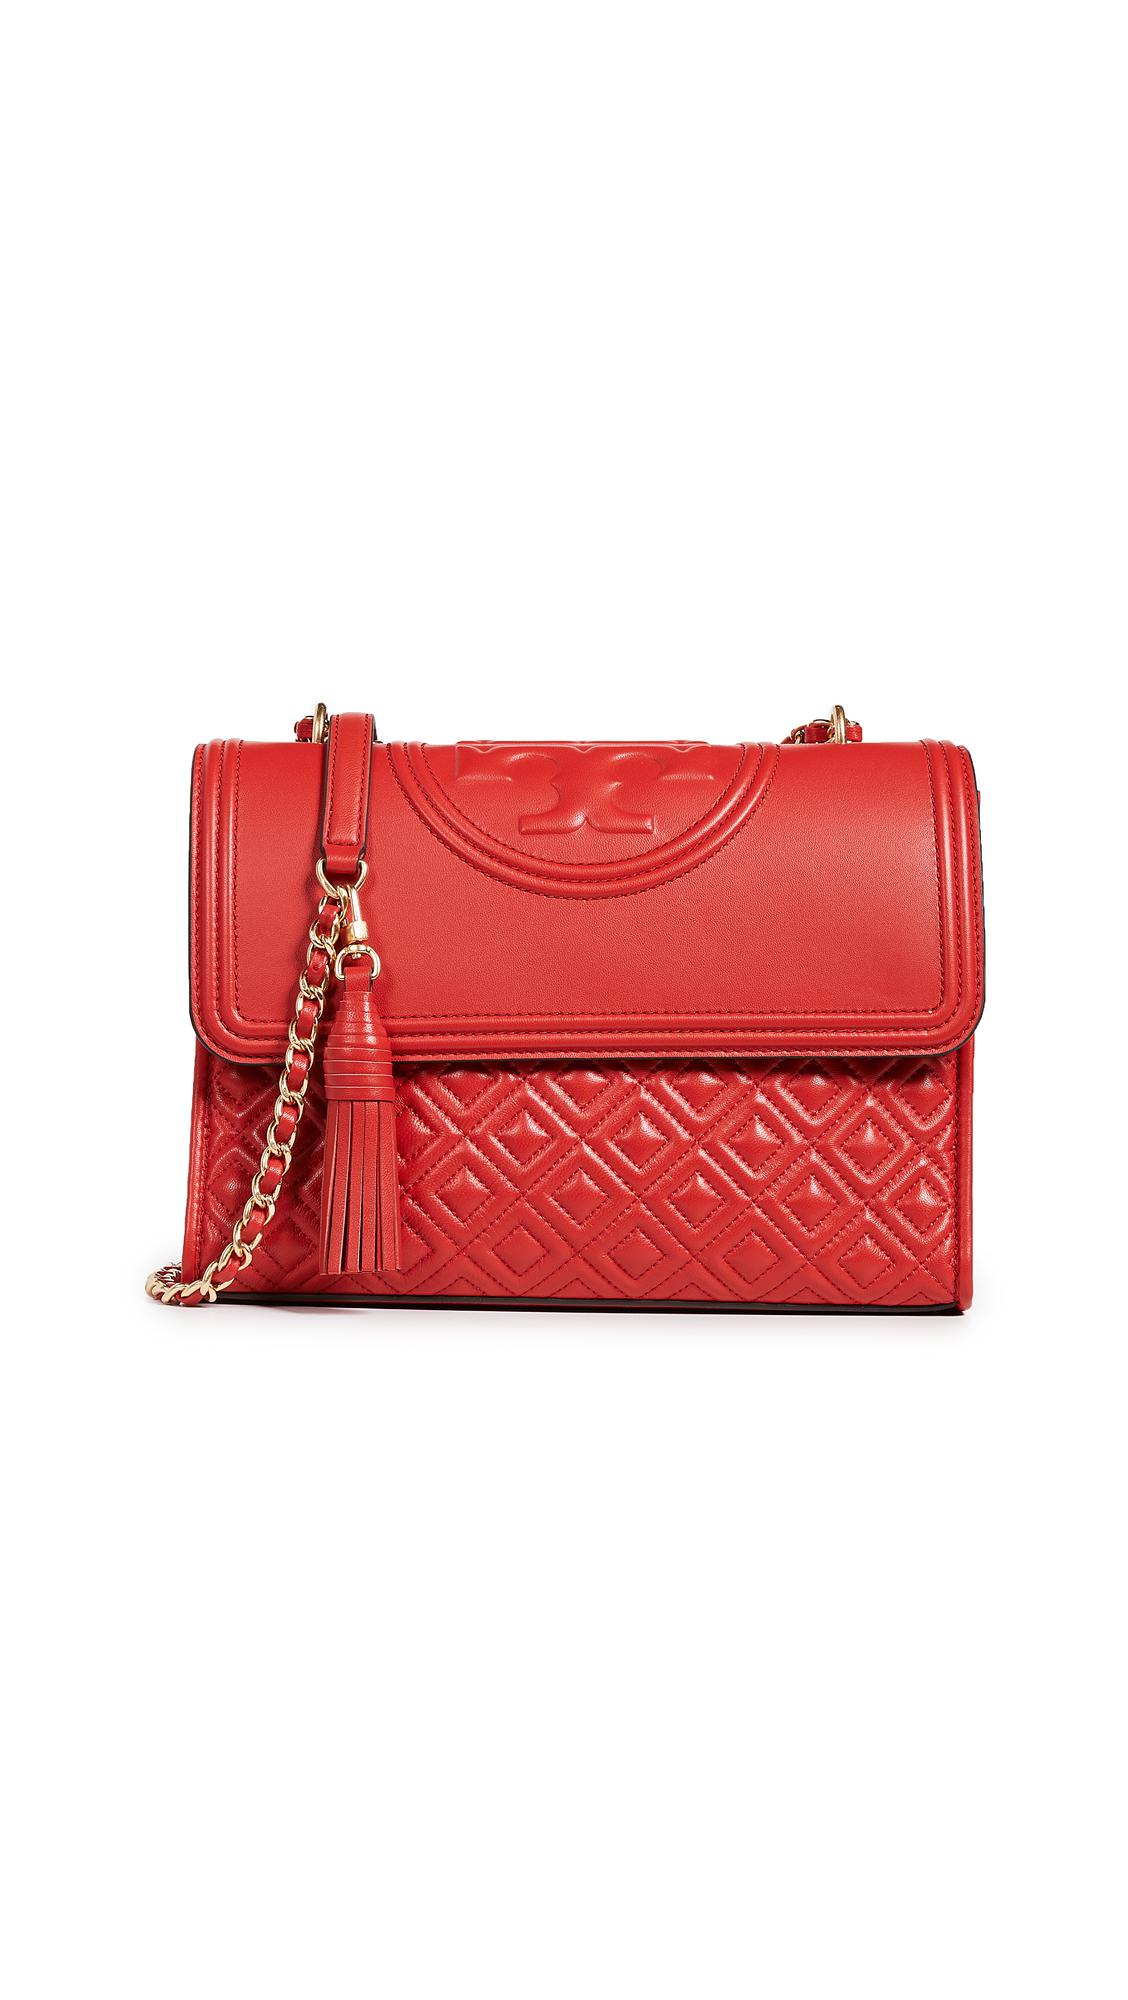 Tory Burch Fleming Convertible Shoulder Bag in Red | Lyst